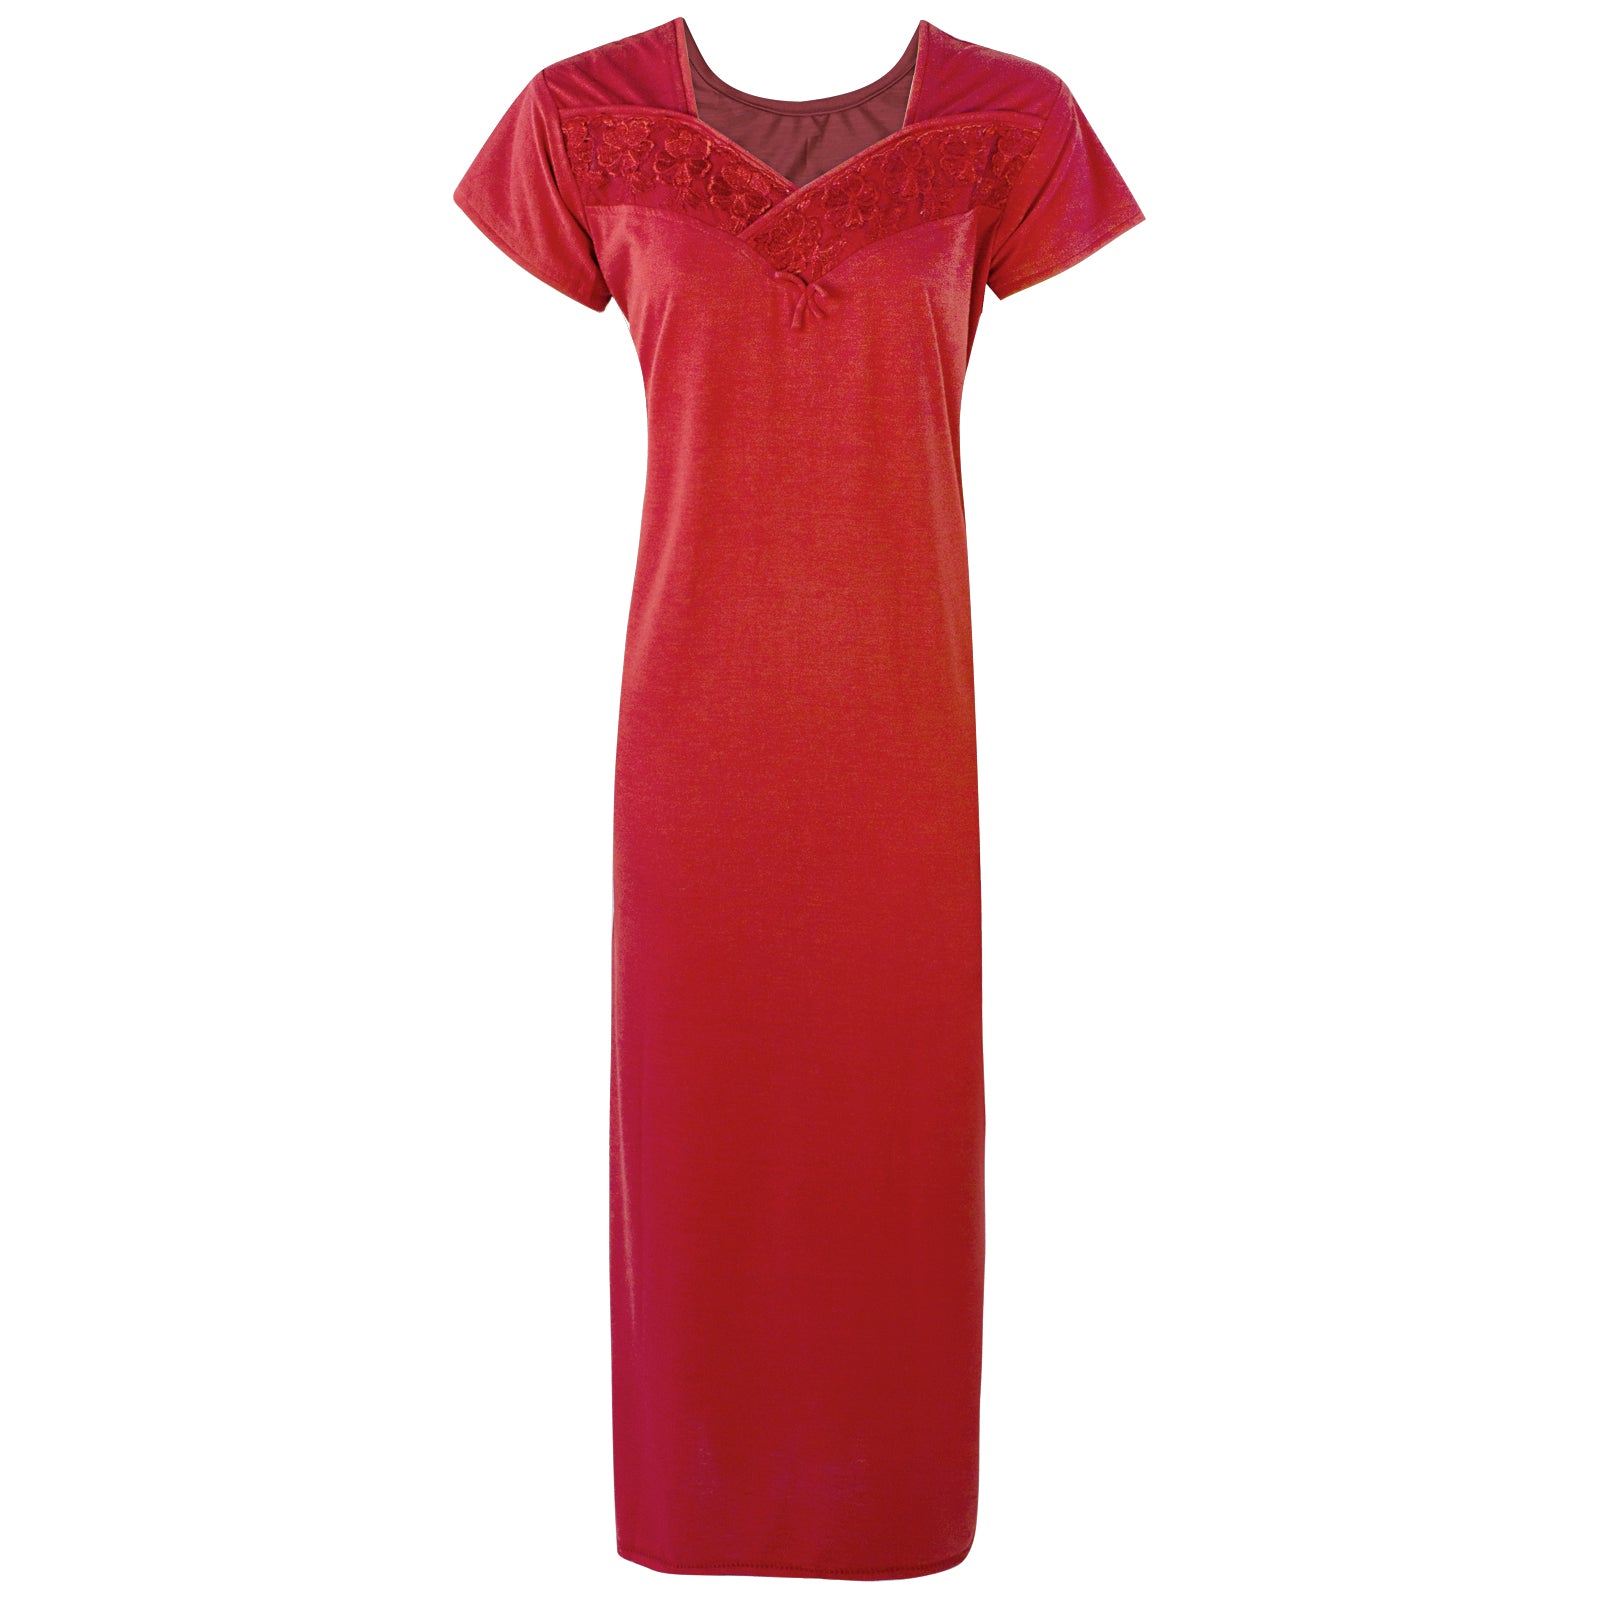 Deep Red / 12-16 Cotton Blend Comfy Jersey Nightdress The Orange Tags